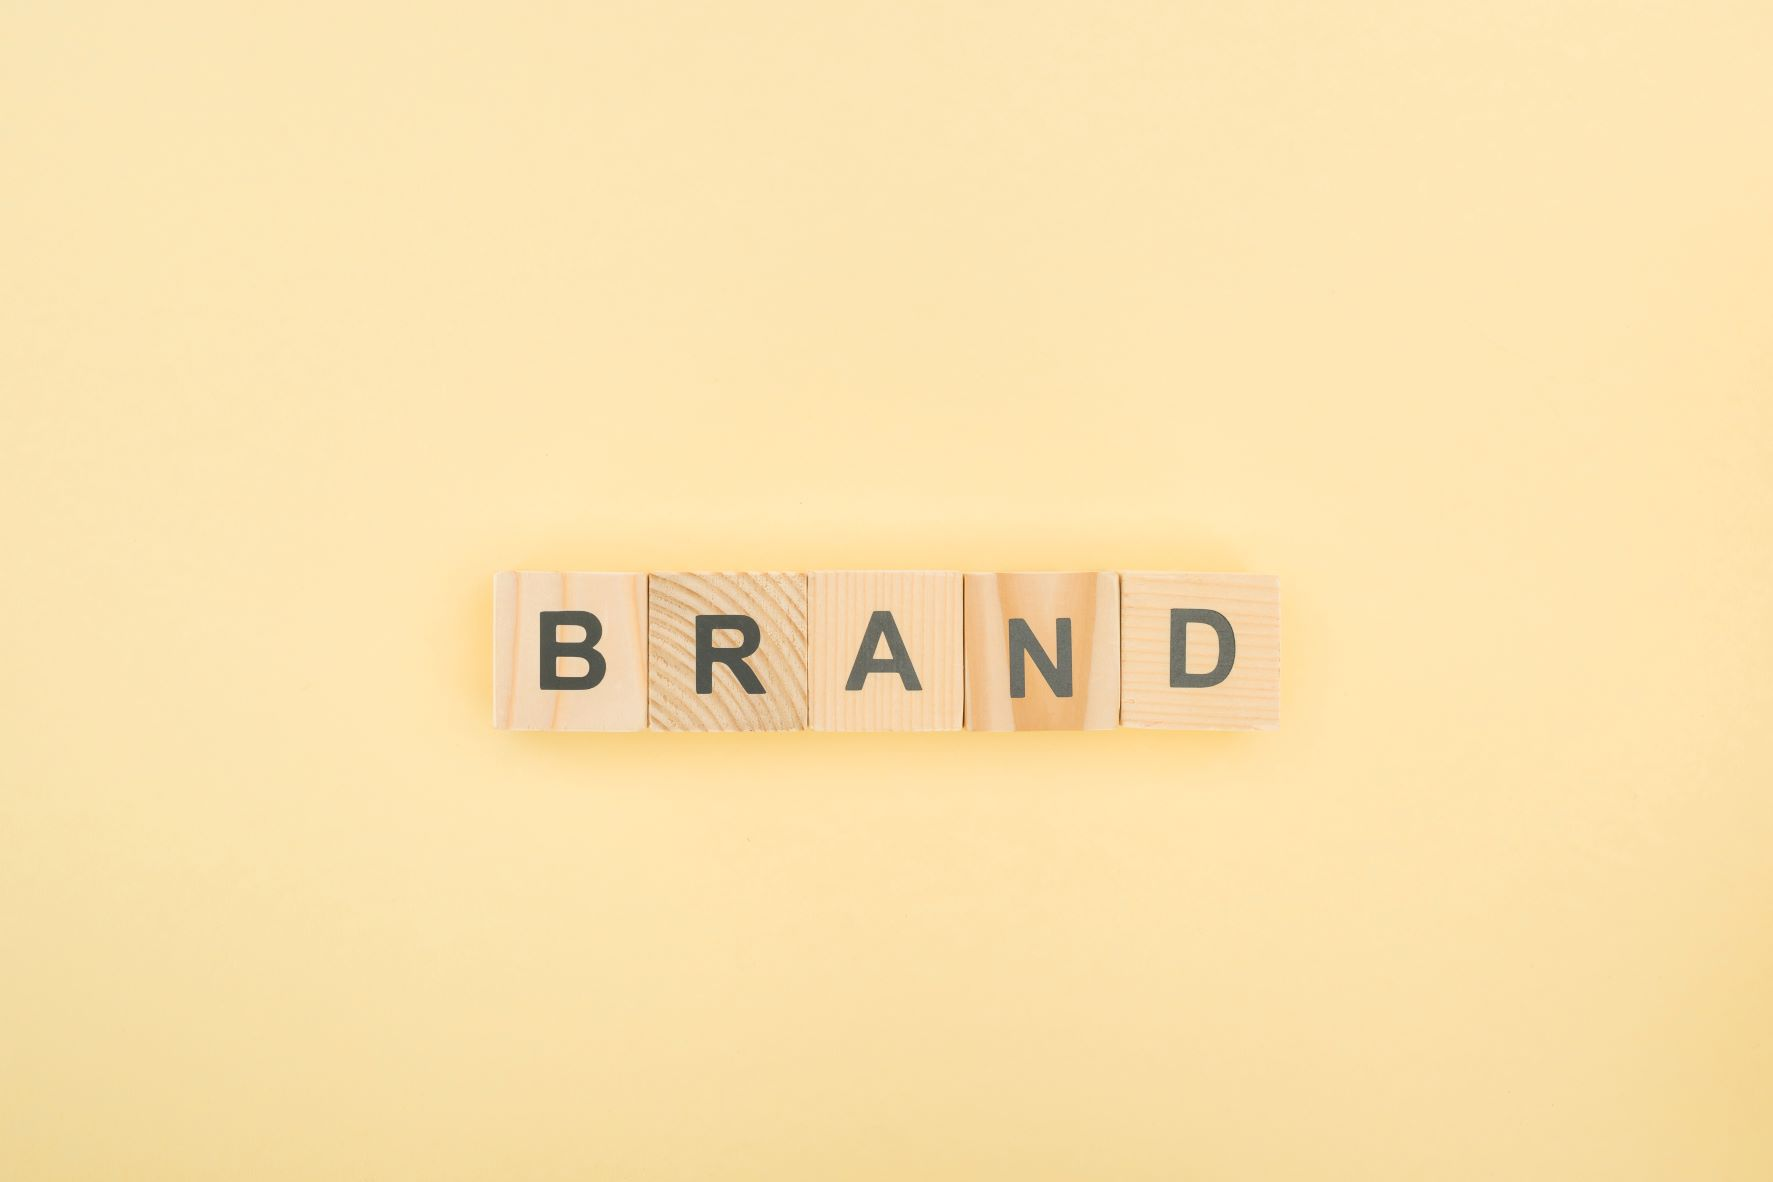 Your dental practice is a brand!